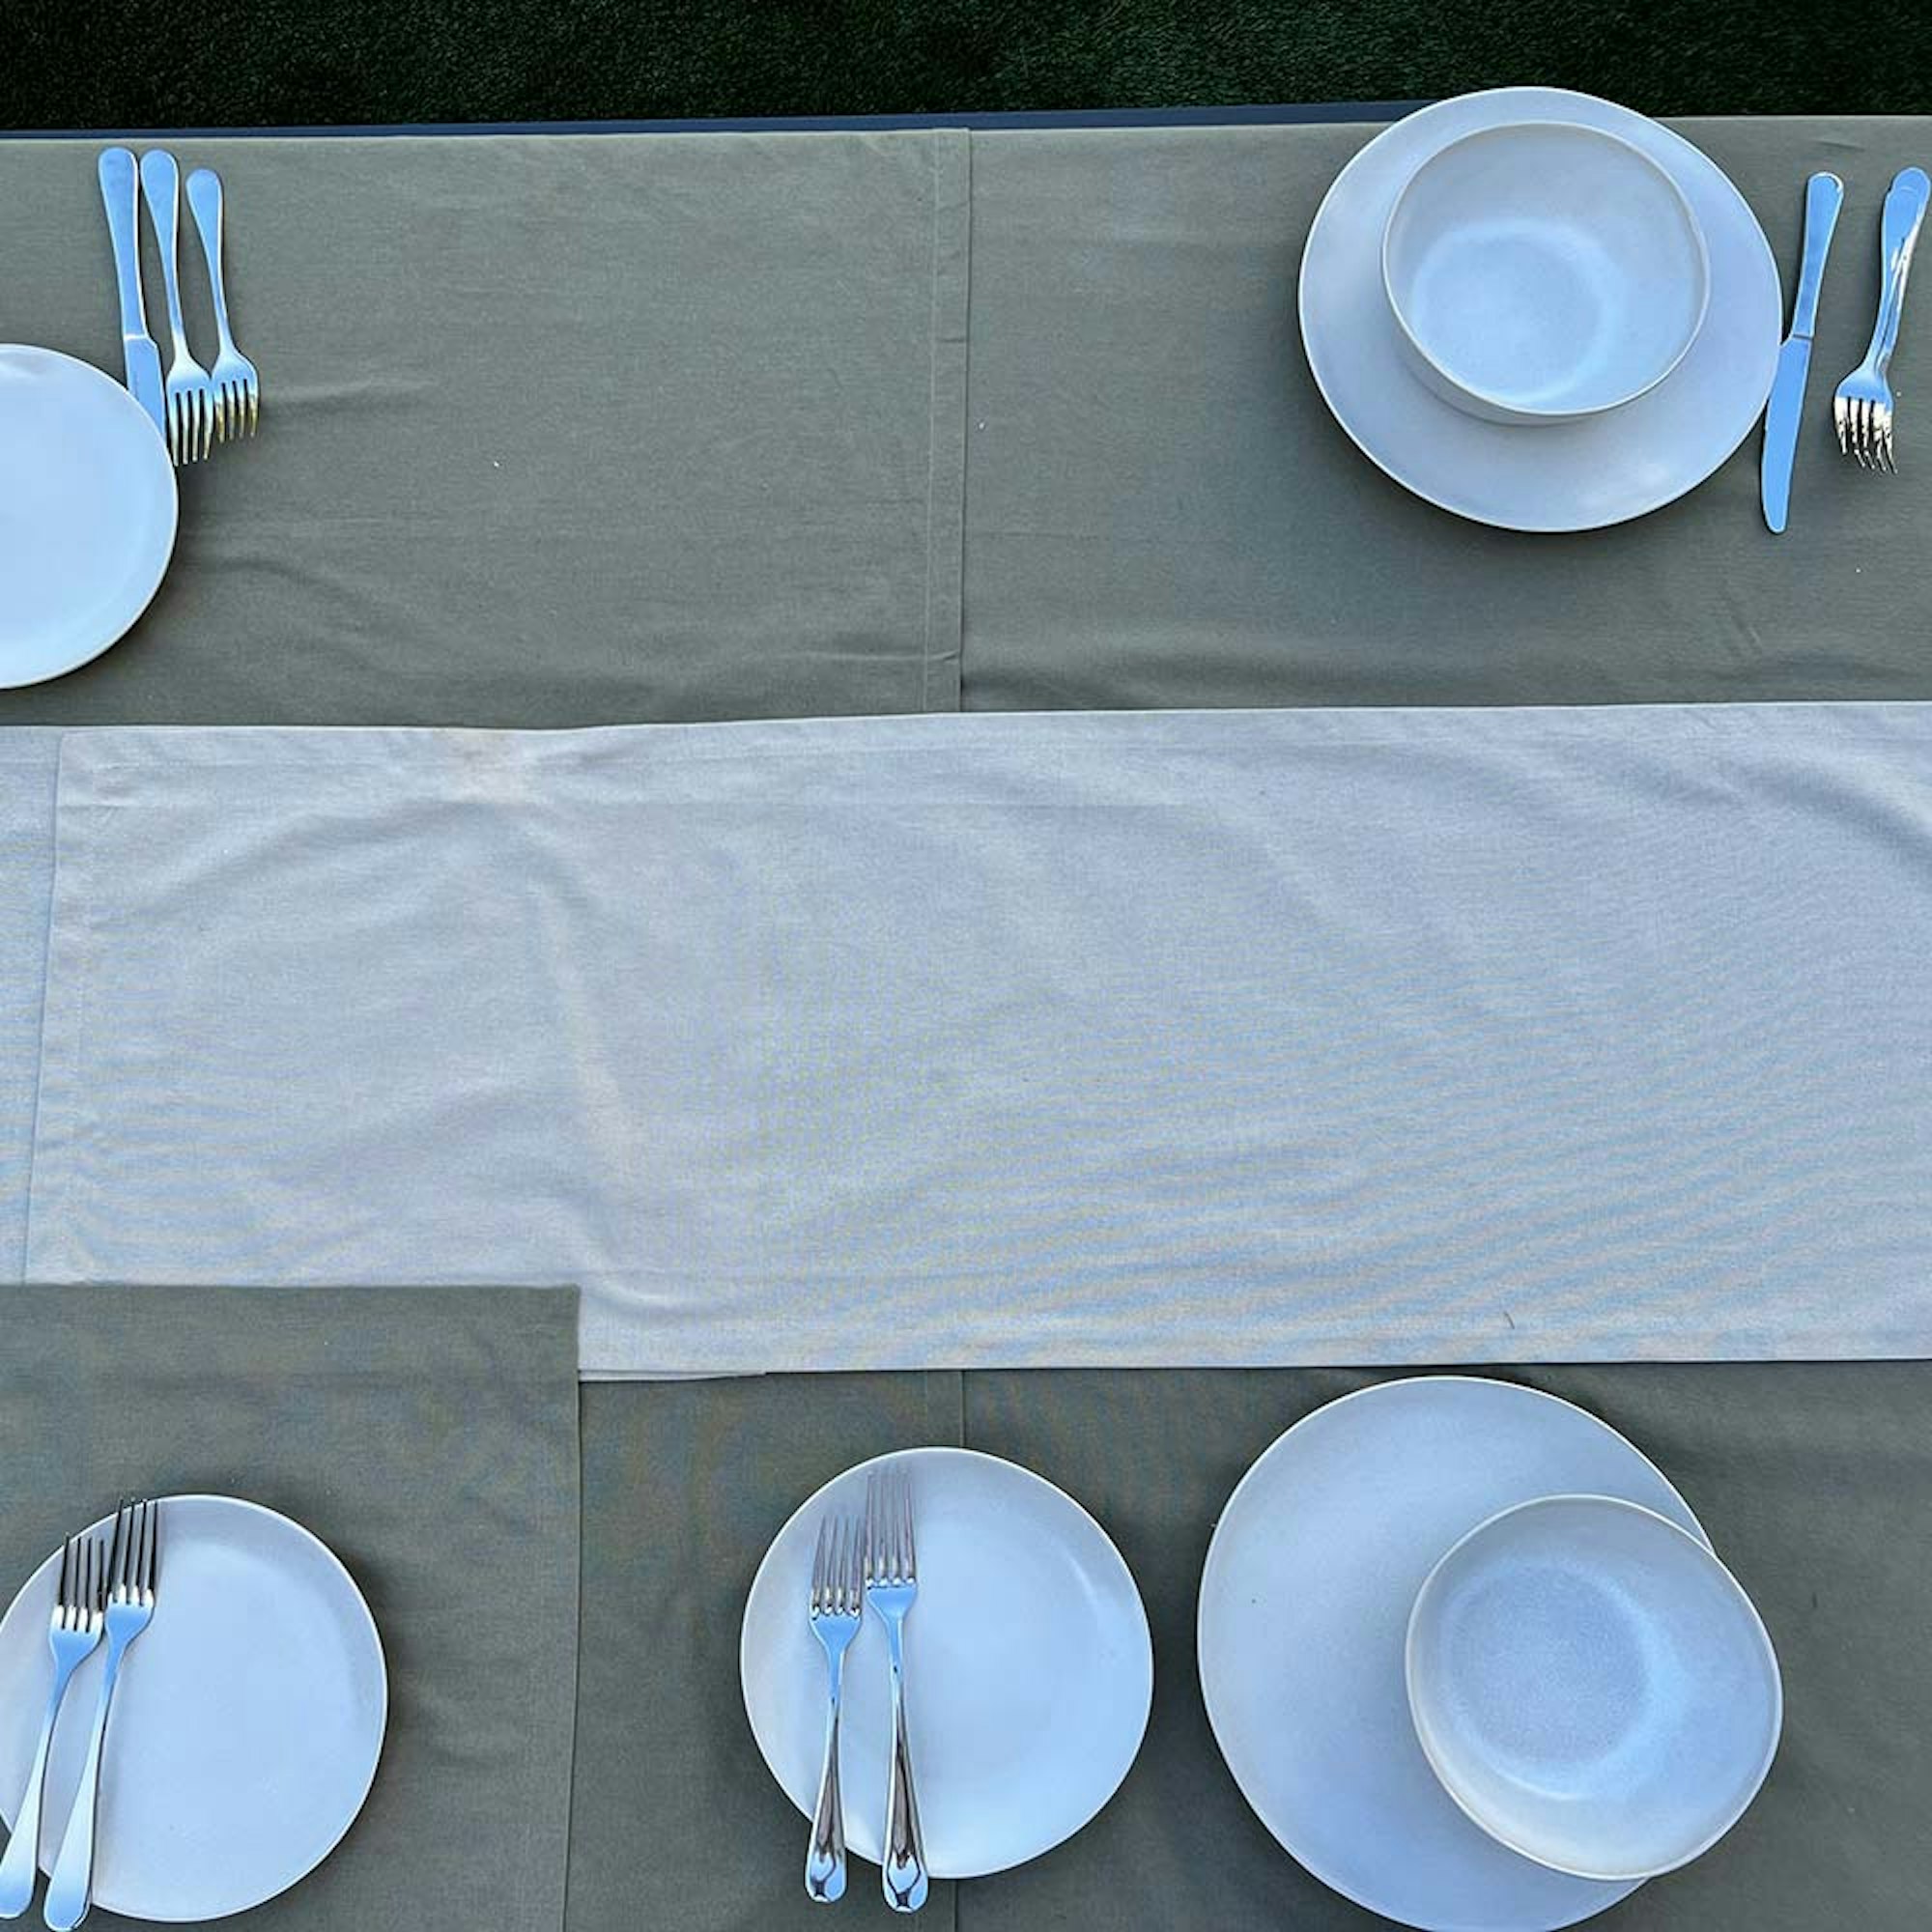 How to style a dining table for a dinner party. Step 4 setting the table. Overhead of table with table linen, dinner set, and cutlery.